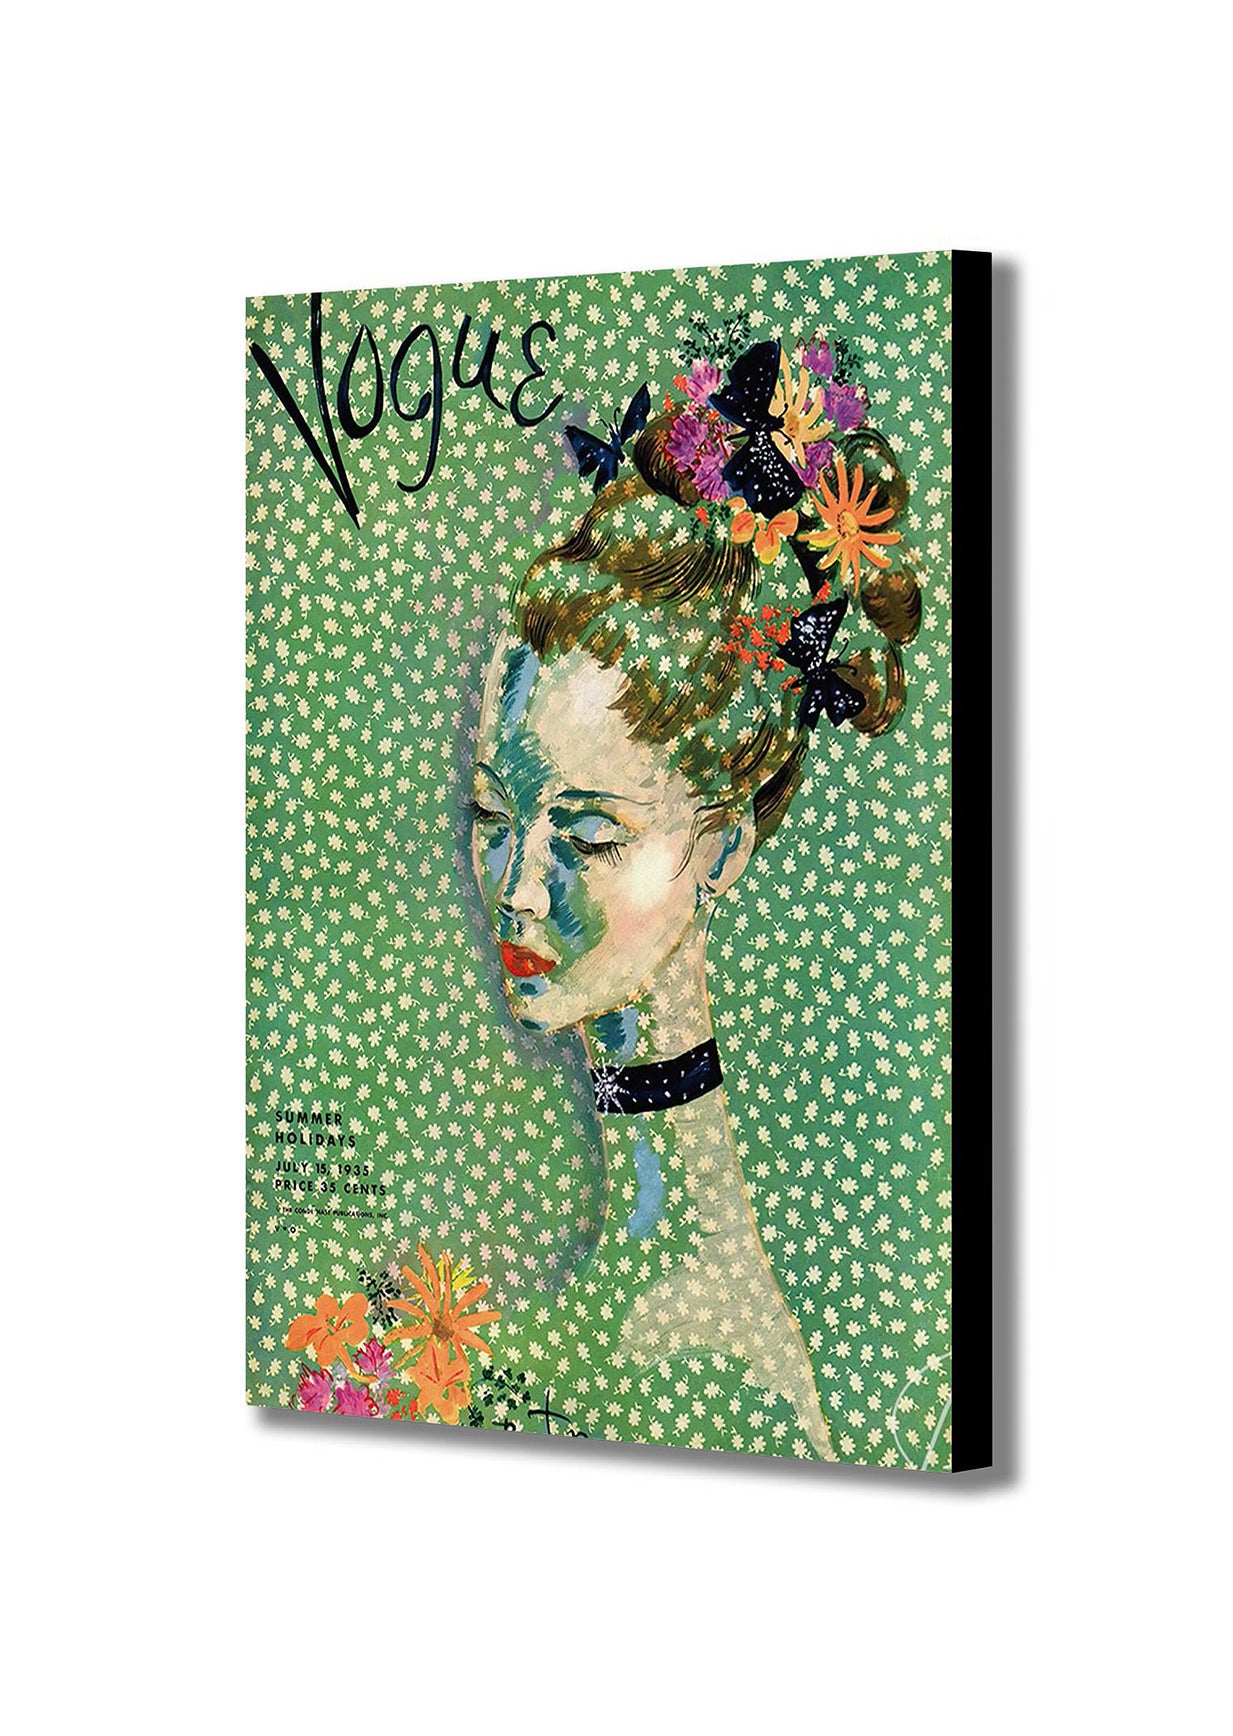 Vogue Cover Vintage Art Deco - 1935 - Female - Green - Canvas Wall Art Framed Print - Various Sizes